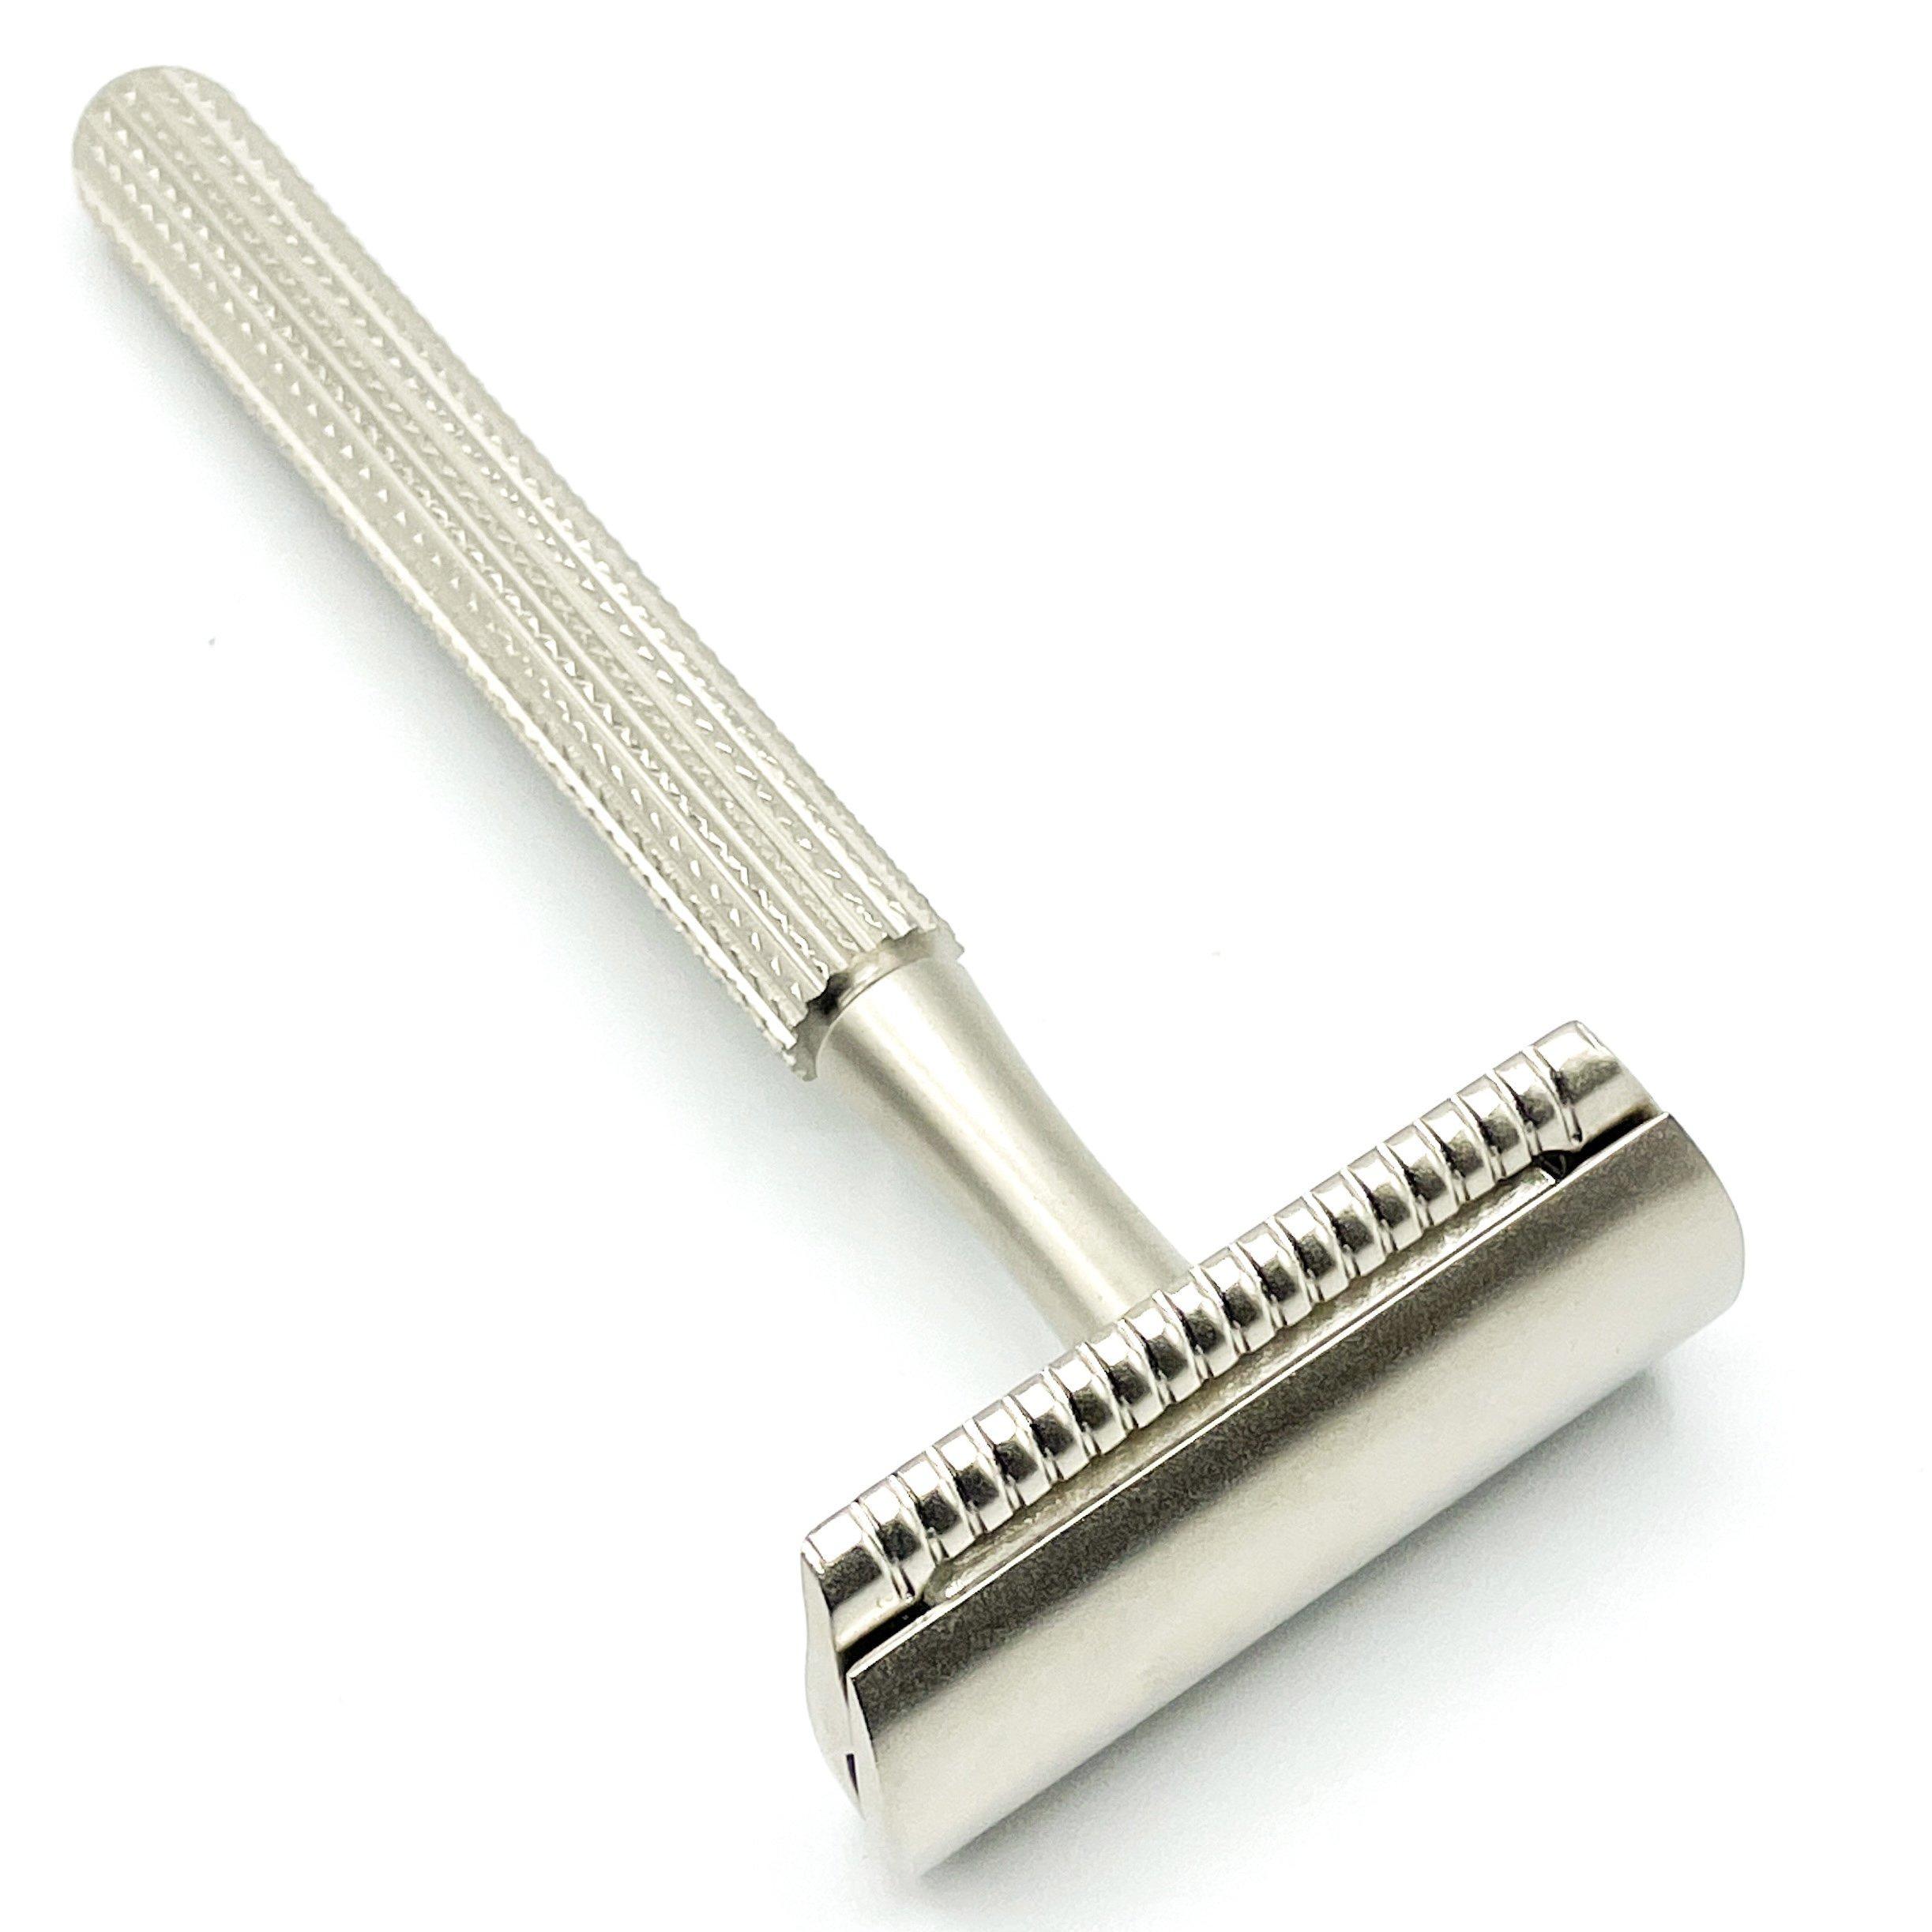 Parker Unisex Textured Long Handle Three piece Safety Razor with new head